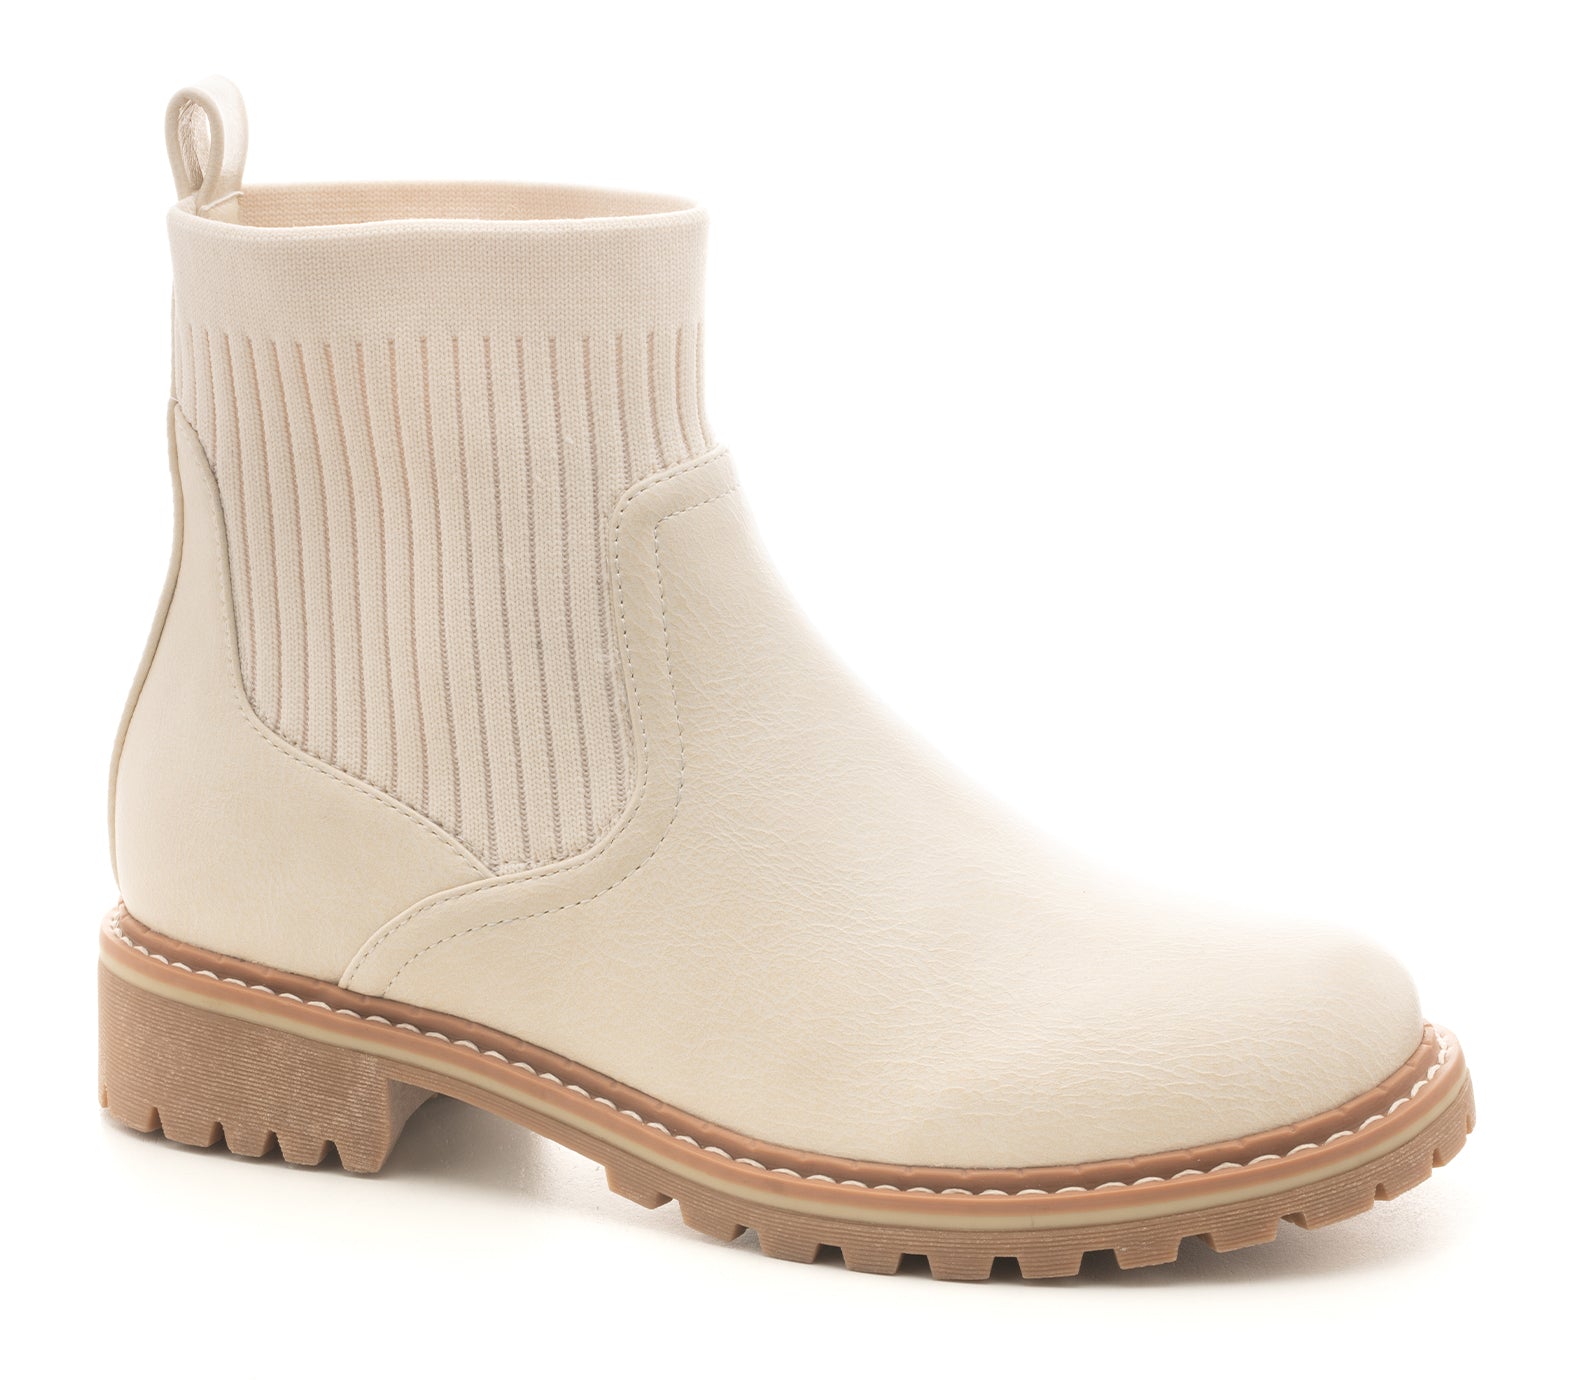 Cabin Fever Cream Slip On Boot by BOUTIQUE Corkys Footwear